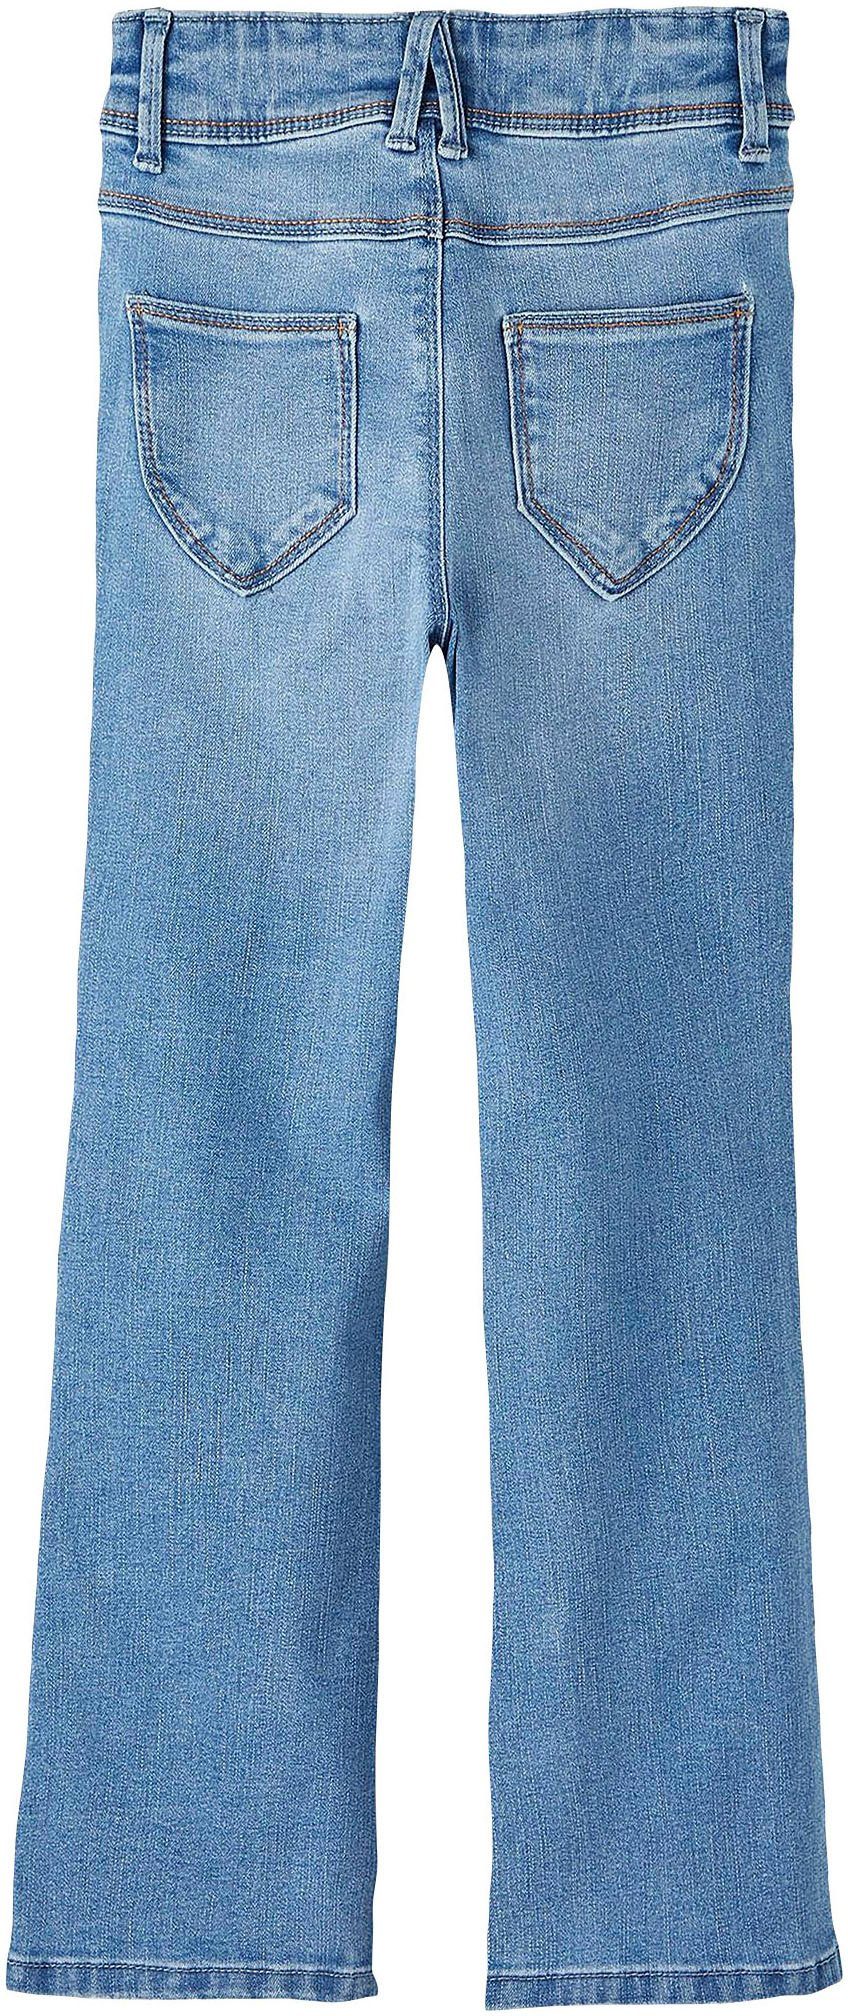 SKINNY NKFPOLLY NOOS Name mit It Stretch Bootcut-Jeans JEANS blue BOOT medium 1142-AU